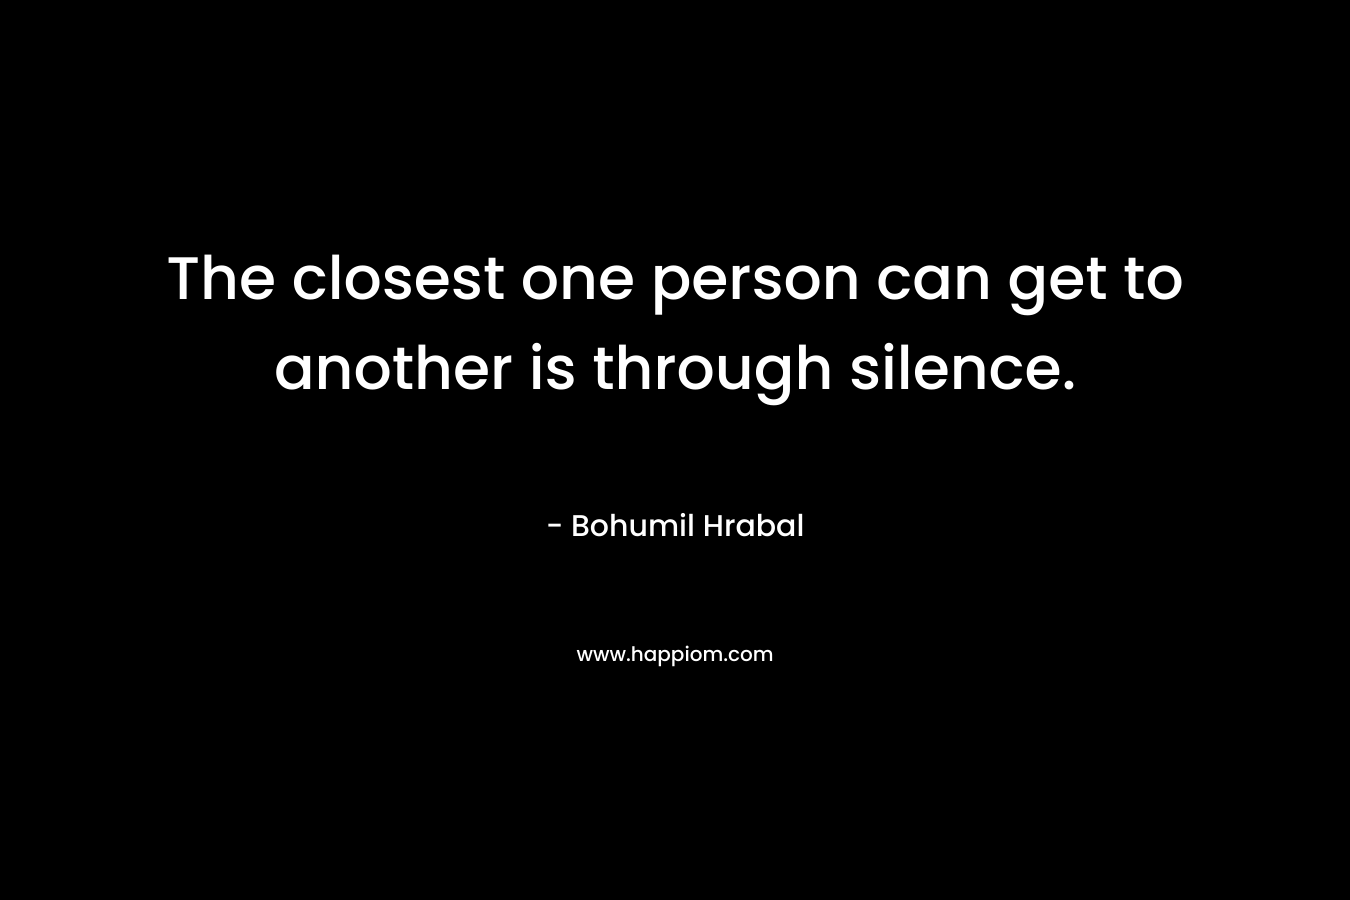 The closest one person can get to another is through silence.